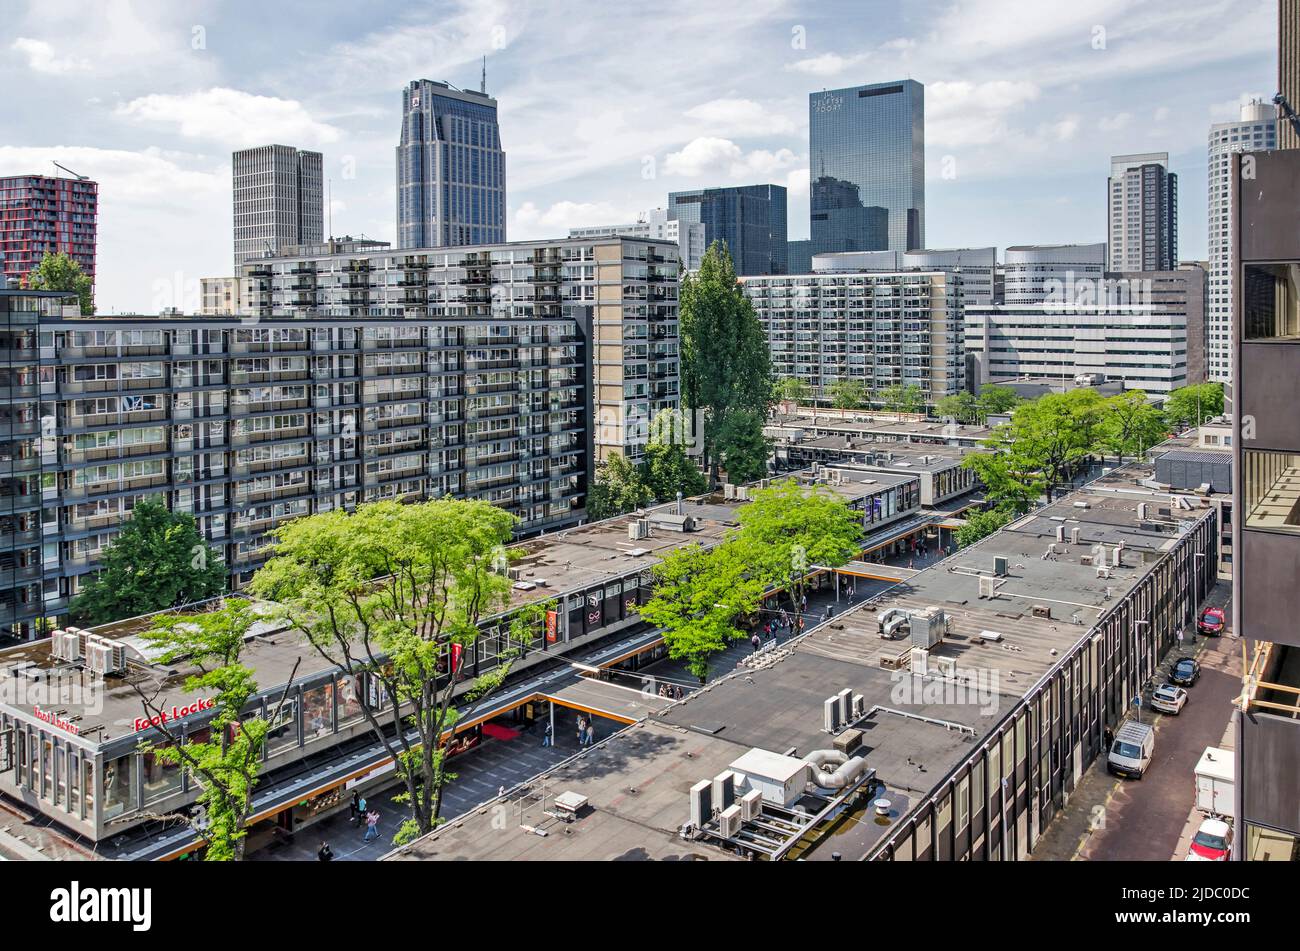 Rotterdam, The Netherlands, June 2, 2022: aerial view of the city center with the Lijnbaan pedestrian shopping street Stock Photo